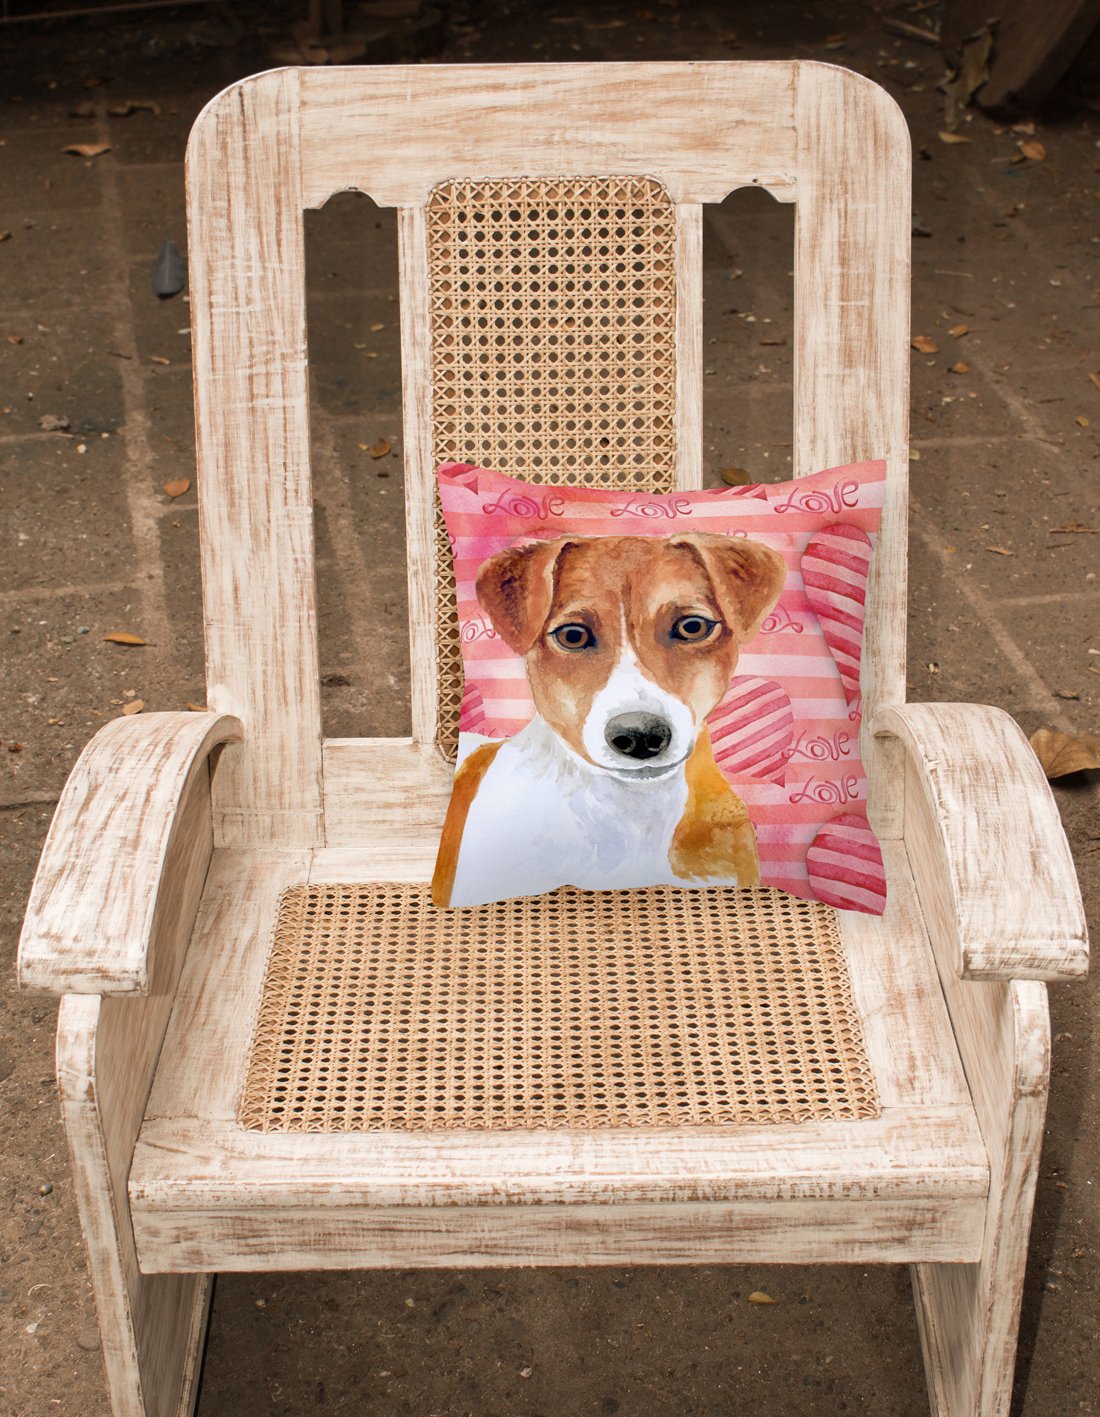 Jack Russell Terrier Love Fabric Decorative Pillow BB9776PW1818 by Caroline's Treasures